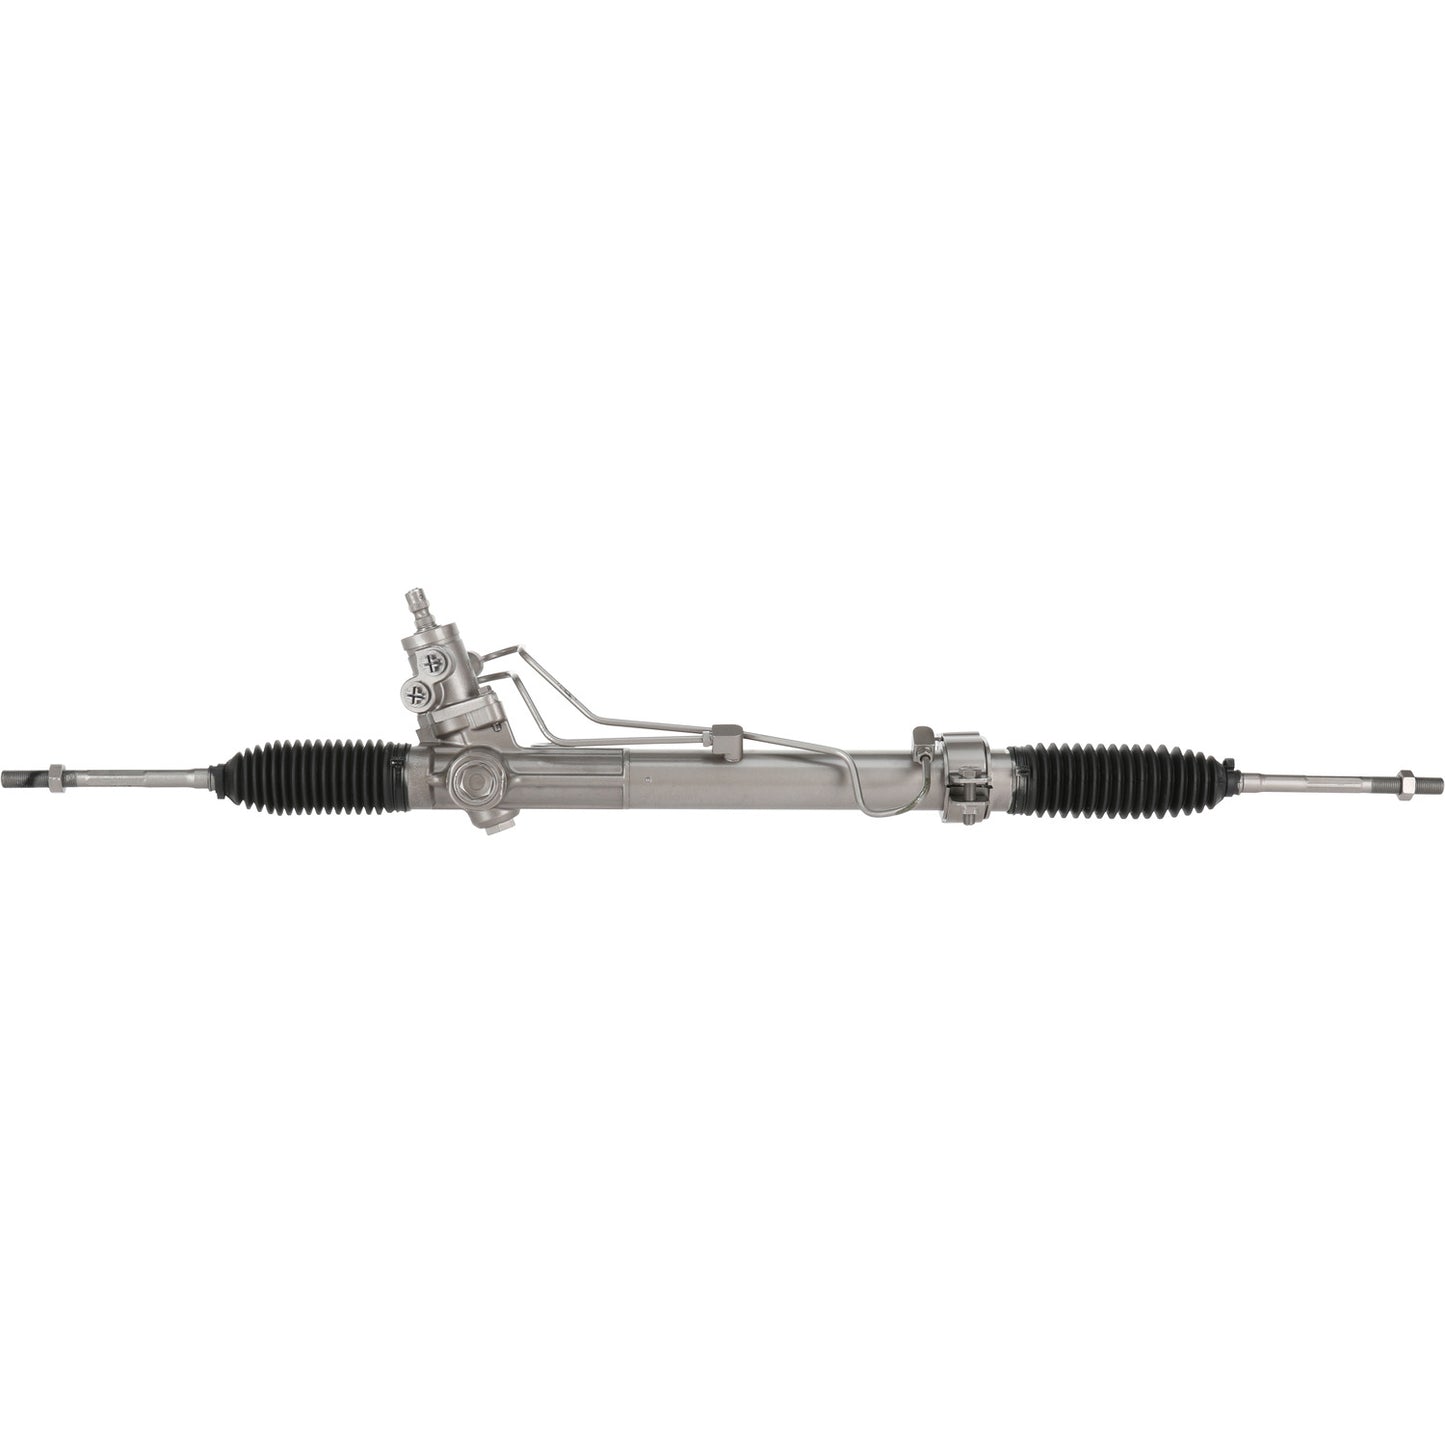 Rack and Pinion Assembly - MAVAL - Hydraulic Power - Remanufactured - 9354M